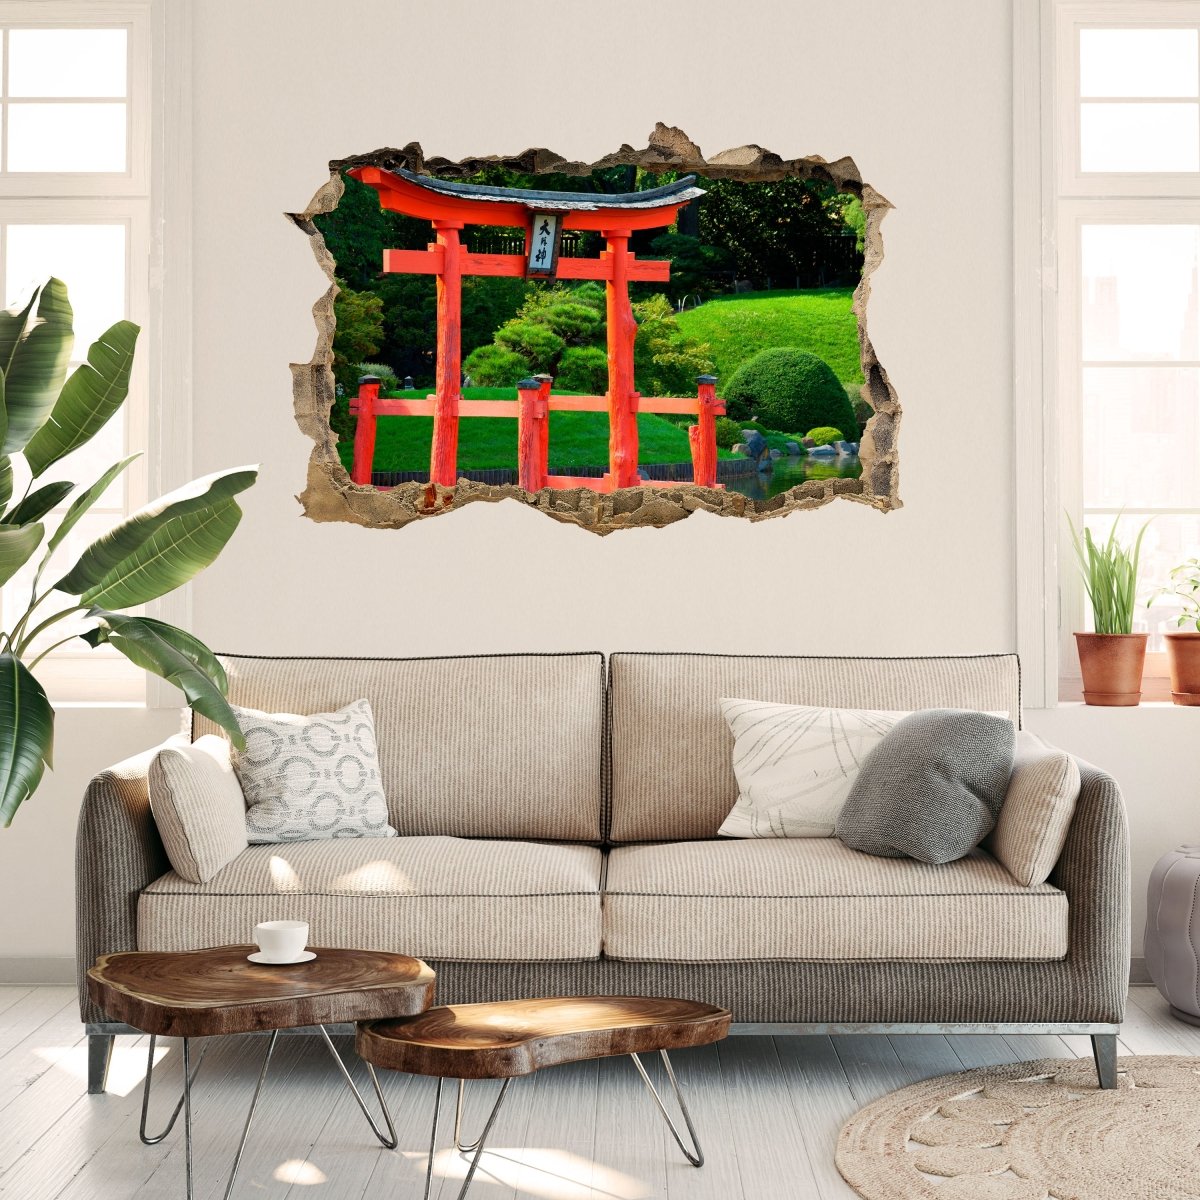 3D wall sticker garden and pond with a red zen tower - Wall Decal M0950